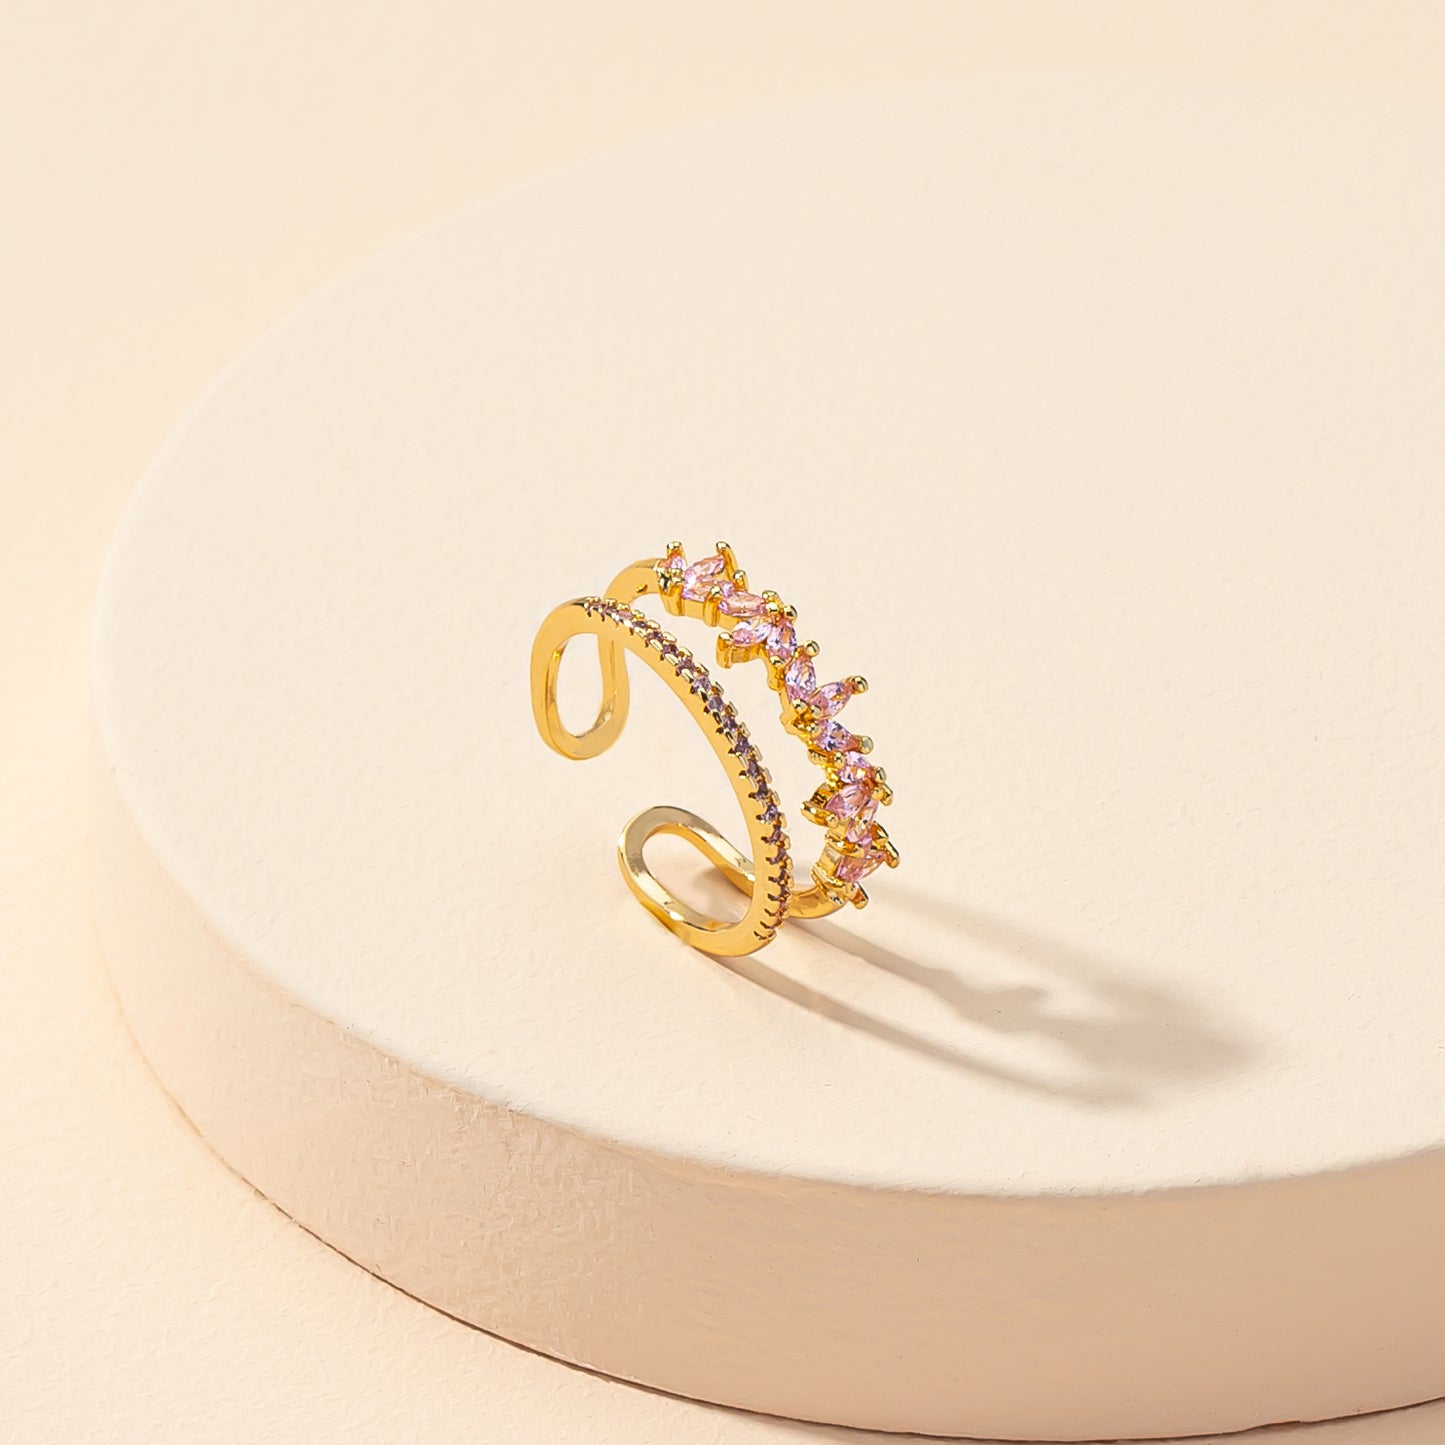 Pink Zirconia Open Ring - Elegant Handcrafted Statement Jewelry for Instagram-Worthy Style